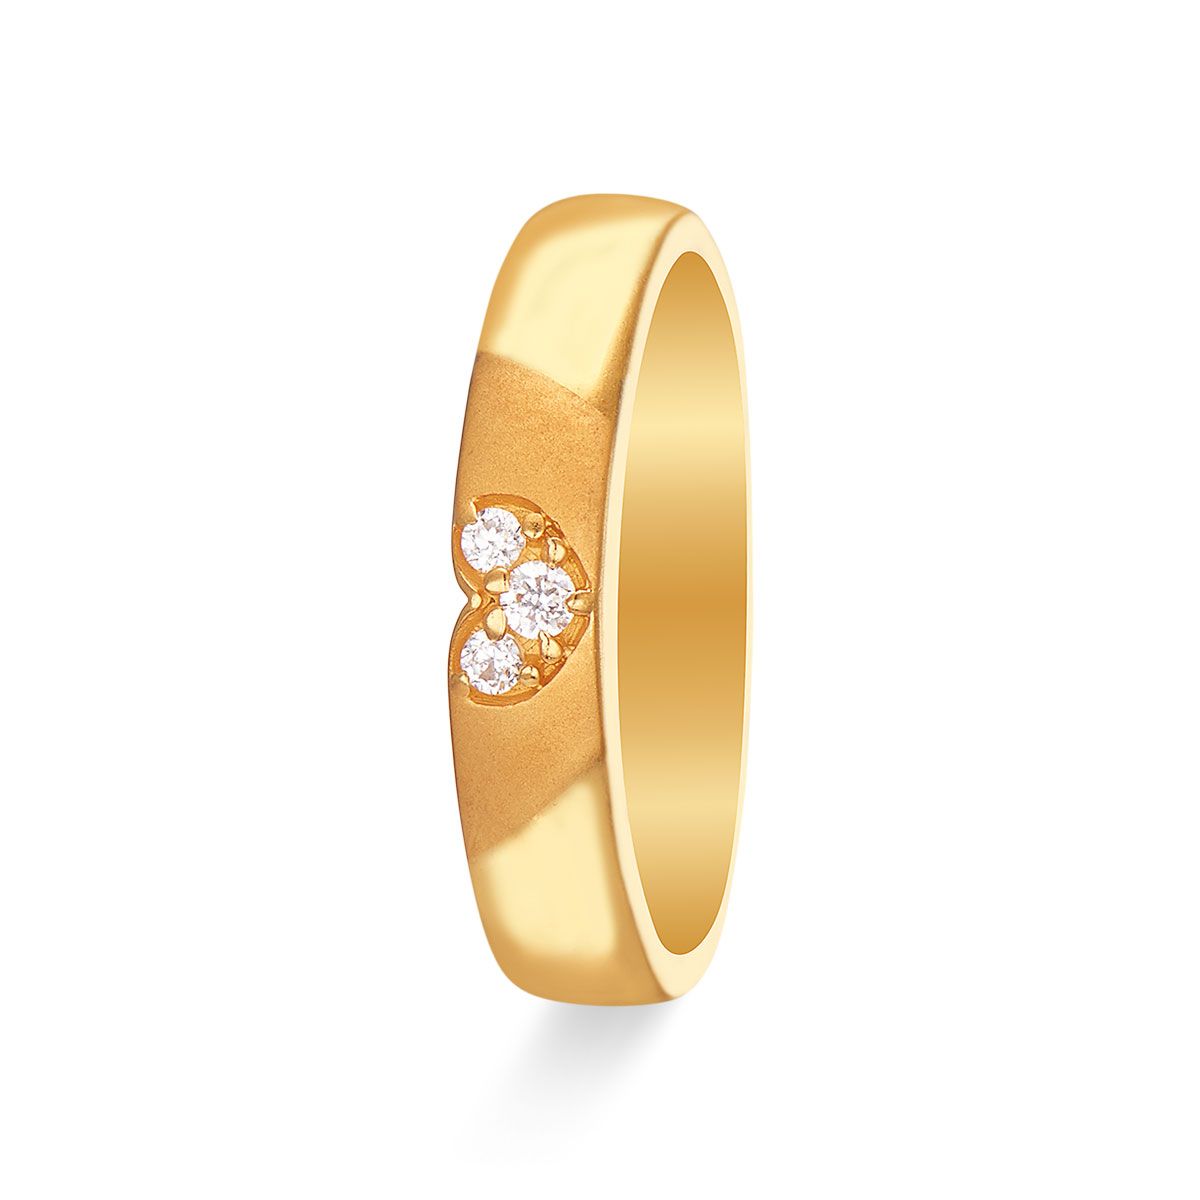 Artistic Name Engraved Gold Couple Rings